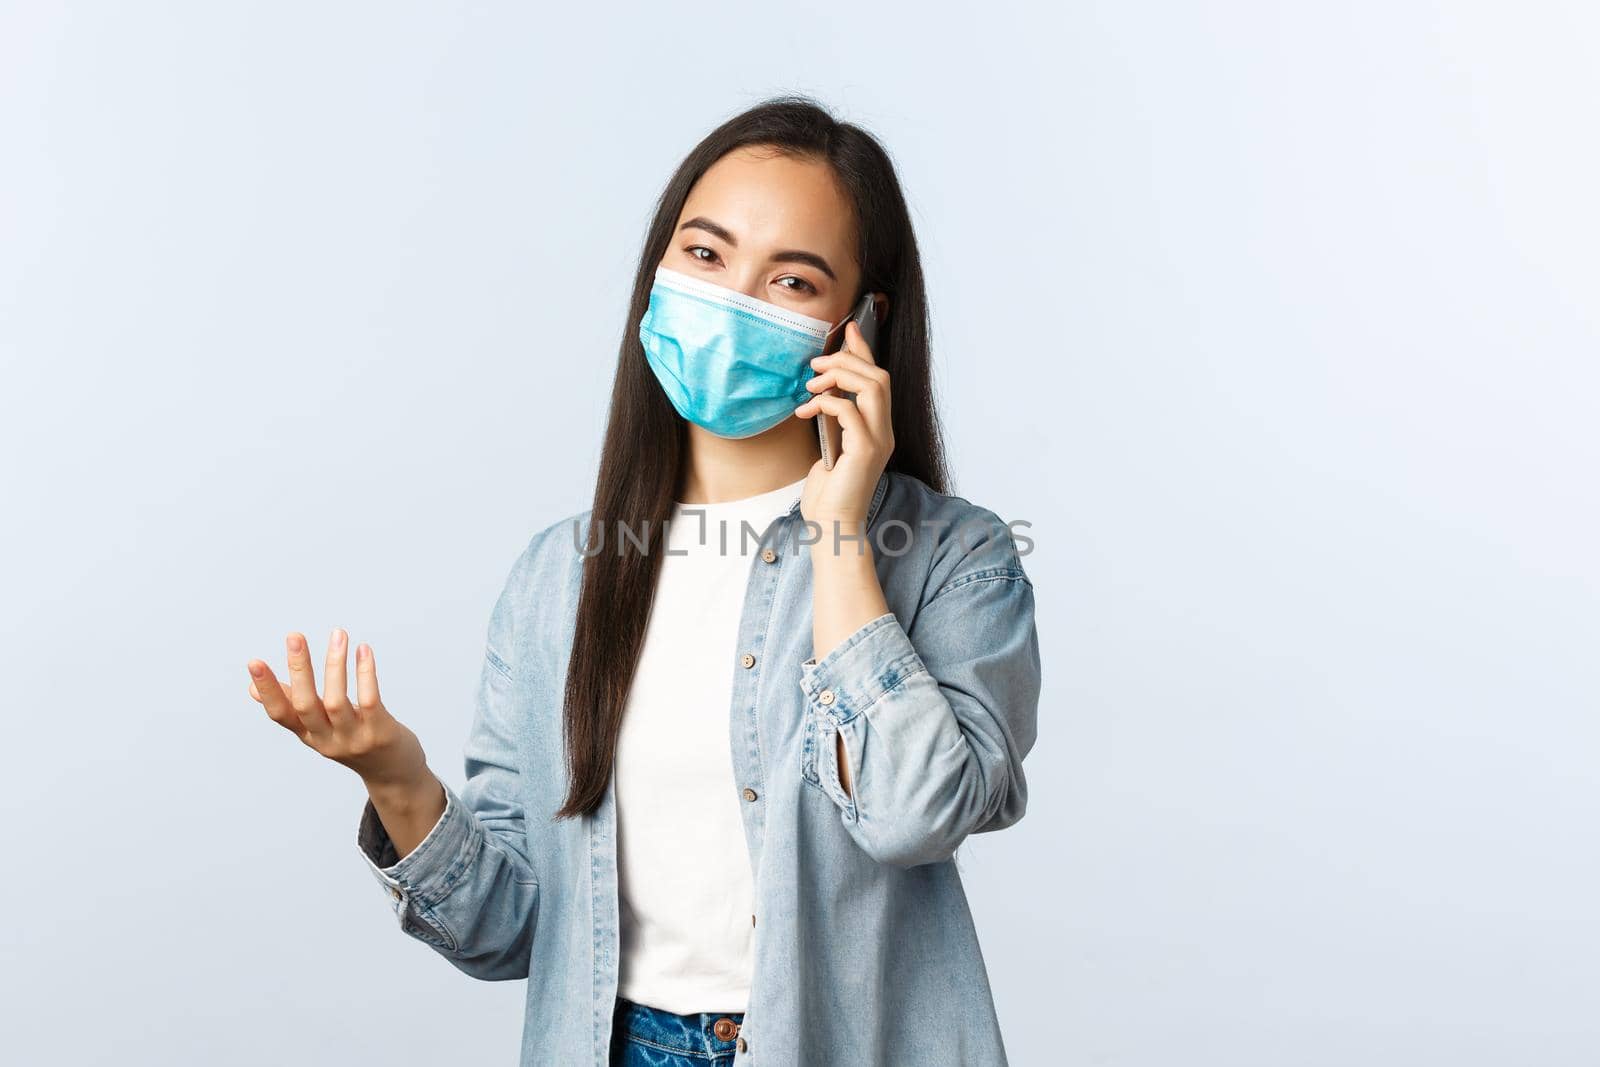 Social distancing lifestyle, covid-19 pandemic and people emotions concept. Modern asian girl in medical mask talking to friend on mobile phone, having conversation or making order.